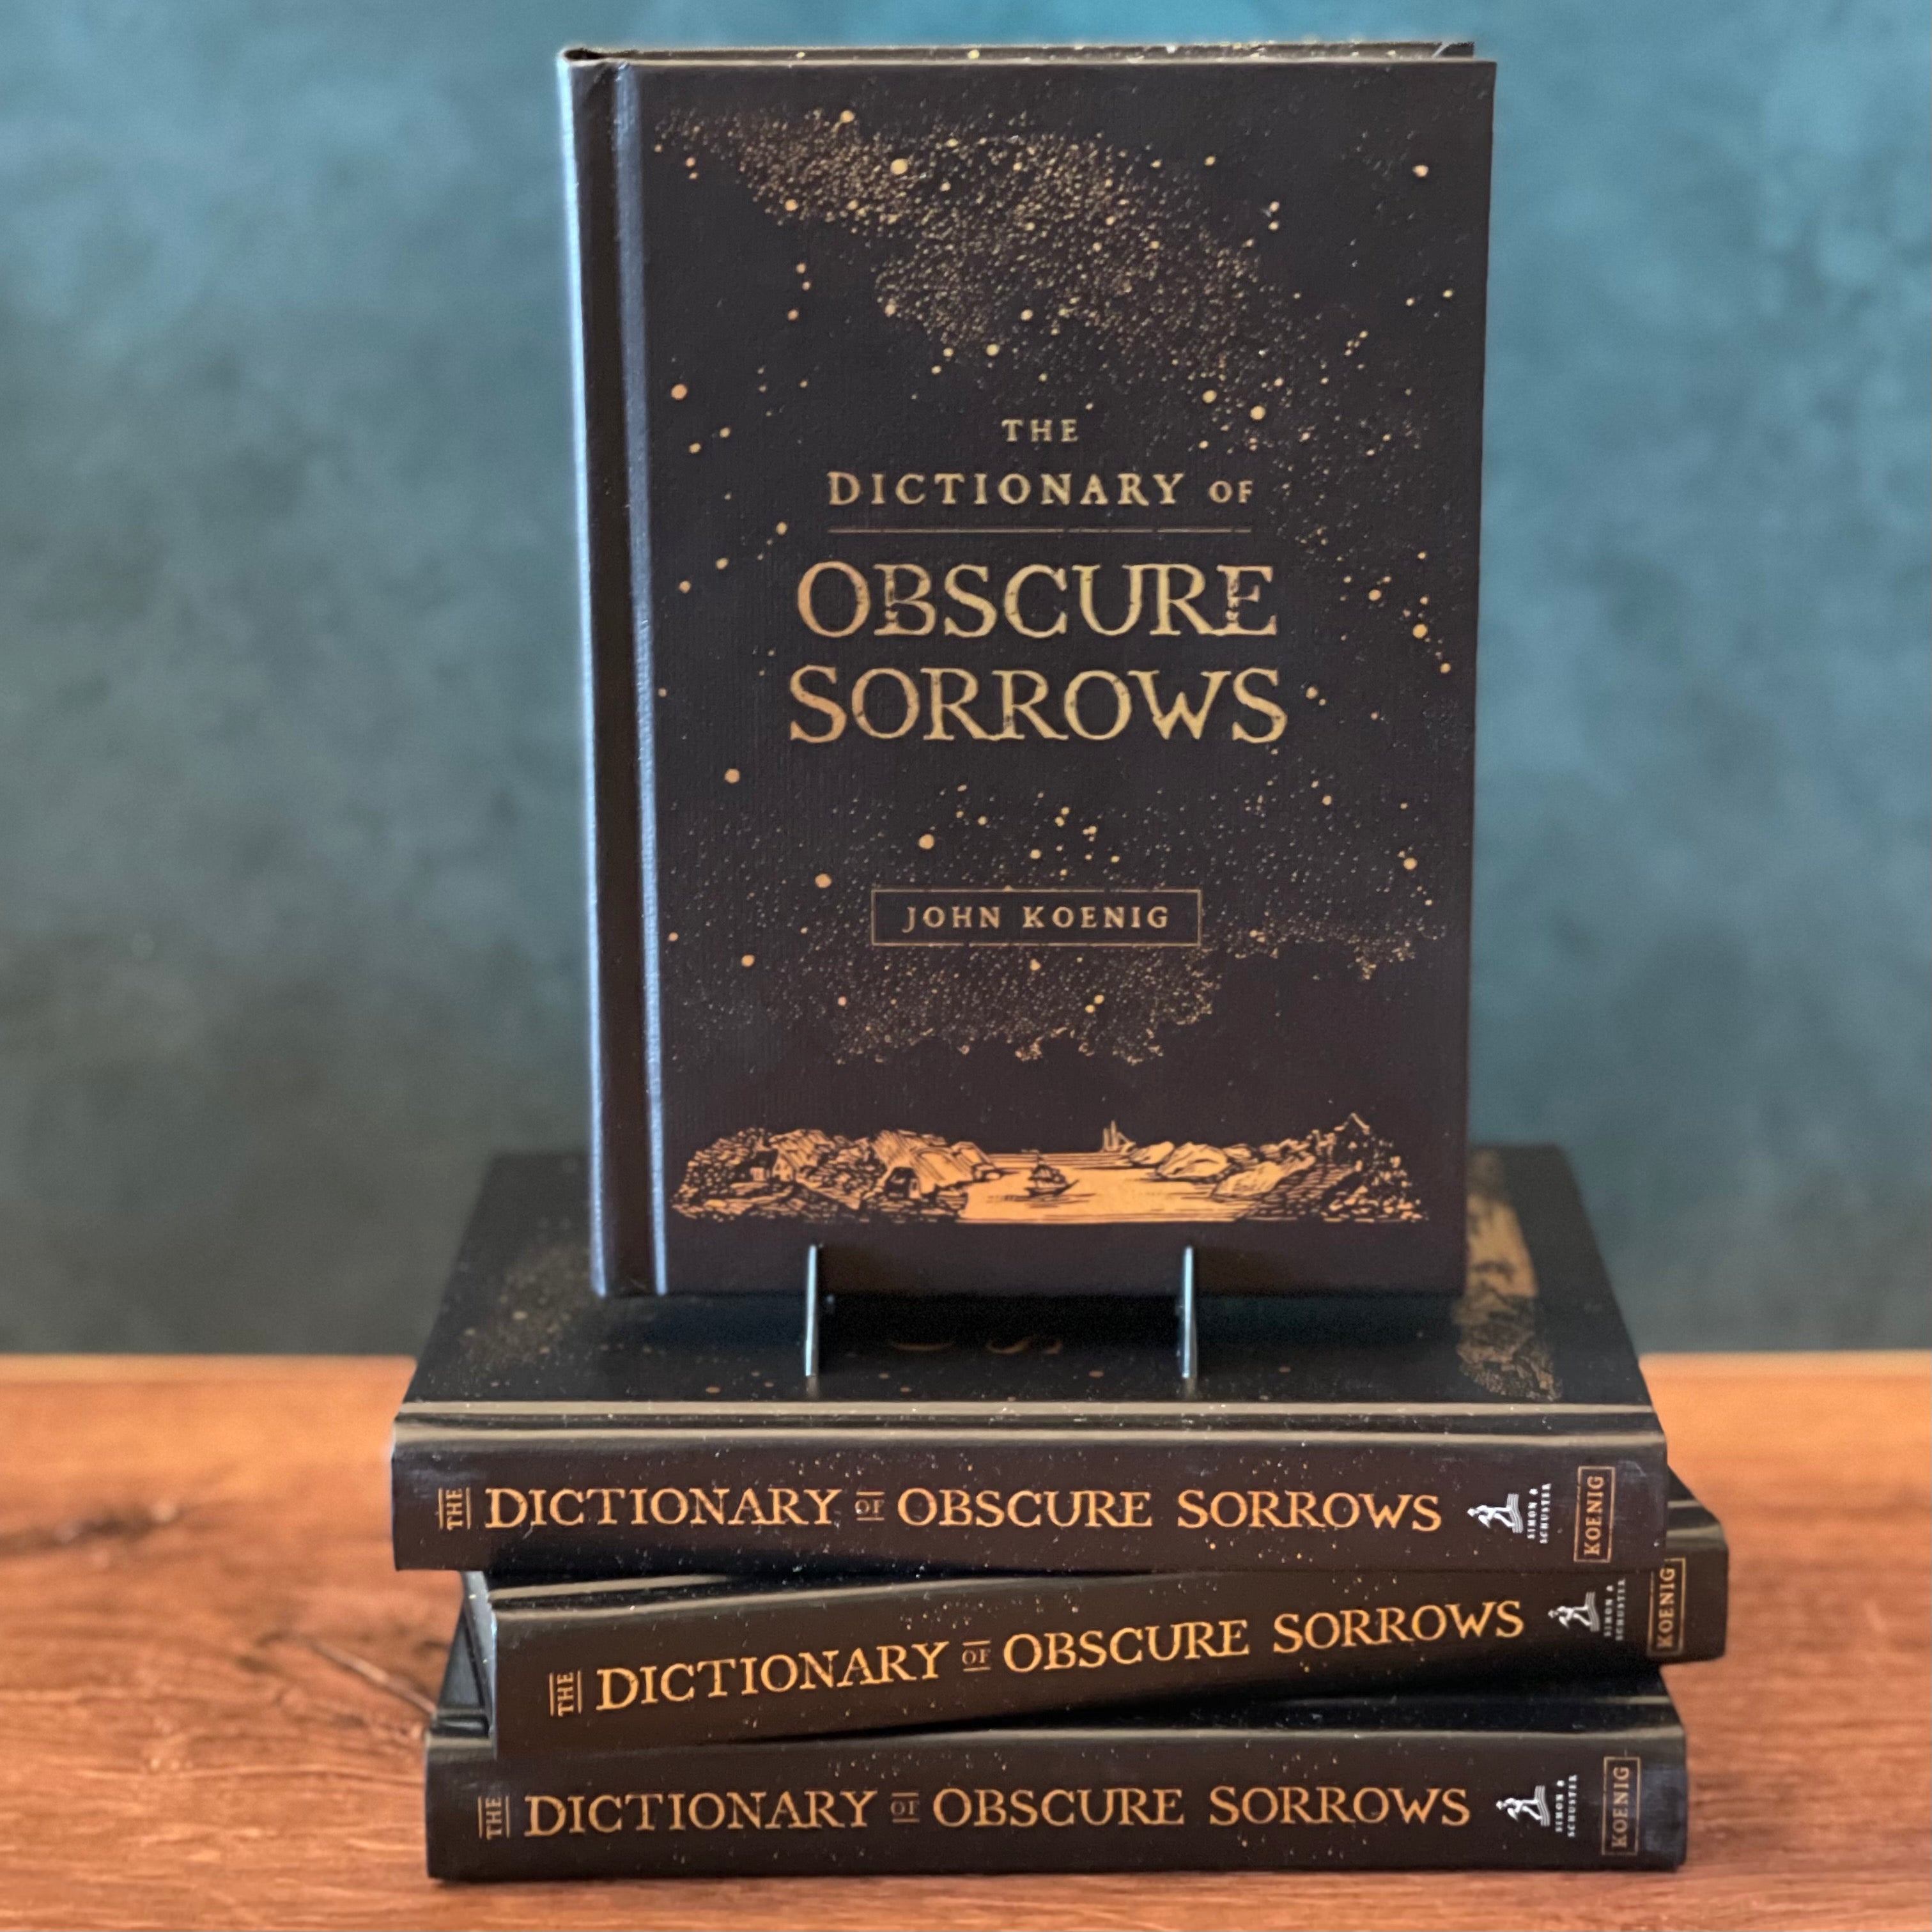 Dictionary of Obscure Sorrows